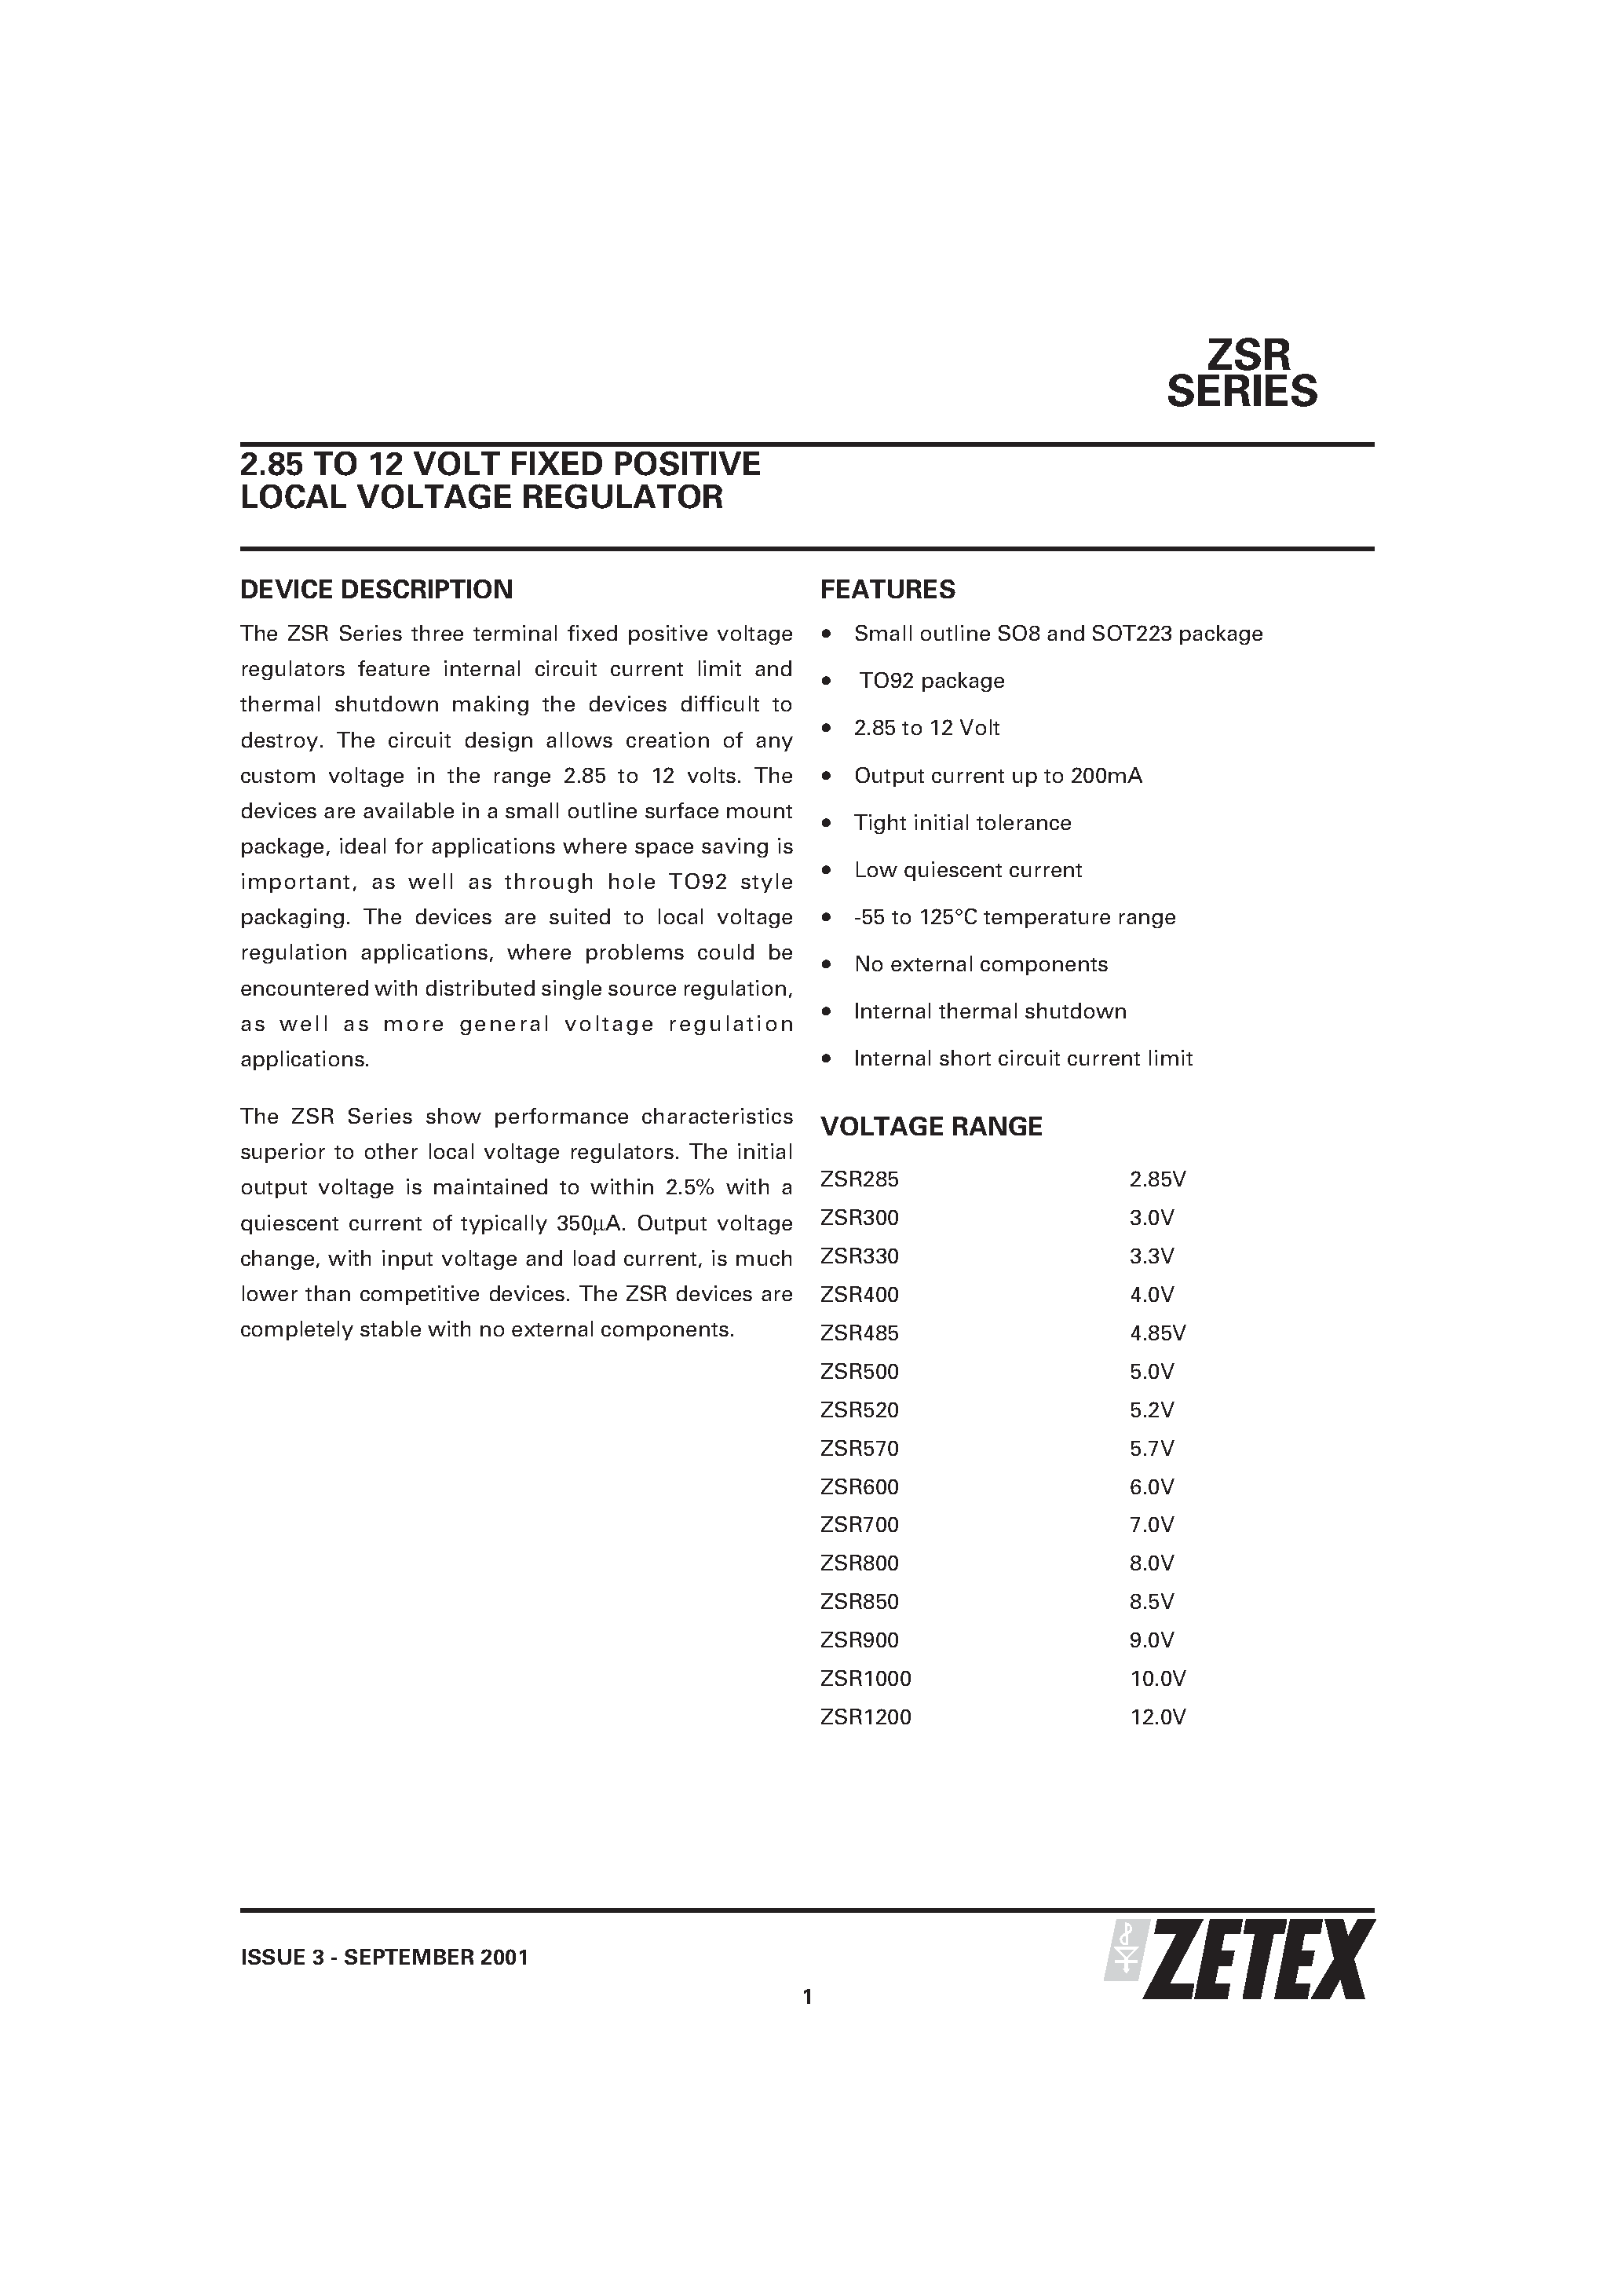 Datasheet ZSR400C - 2.85 TO 12 VOLT FIXED POSITIVE LOCAL VOLTAGE REGULATOR page 1